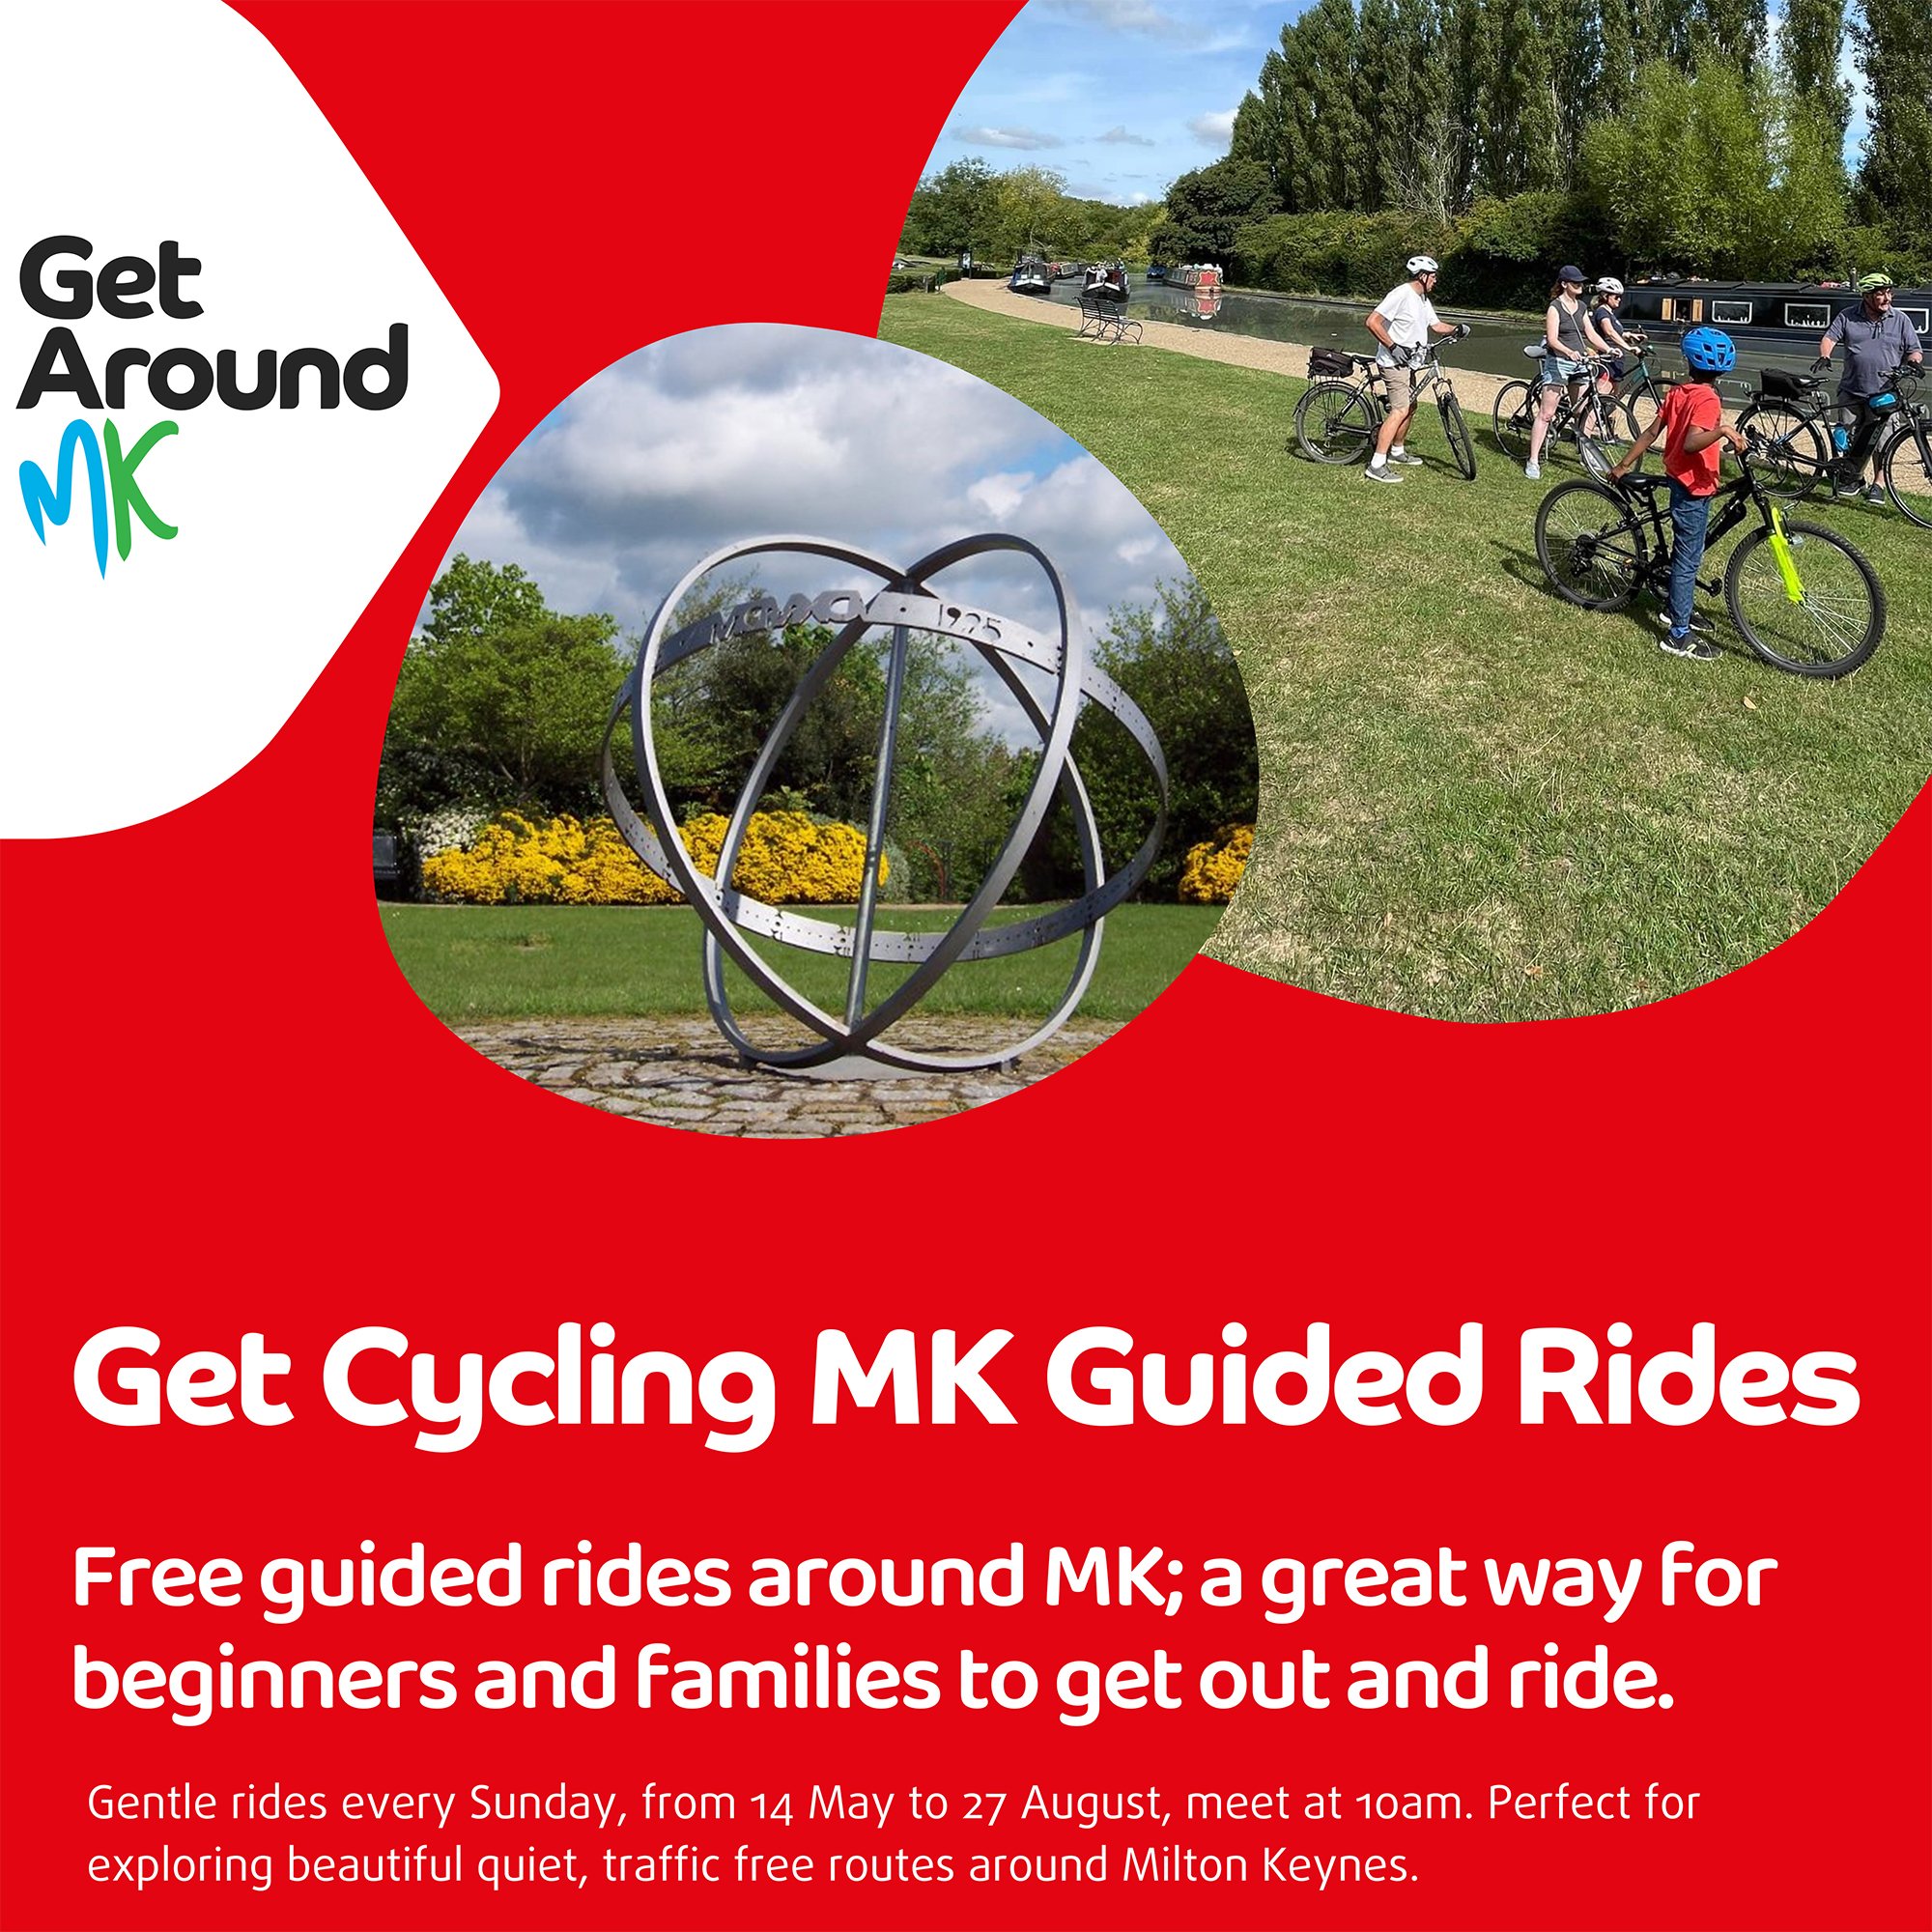 Guided Cycle Rides are back across Milton Keynes this summer